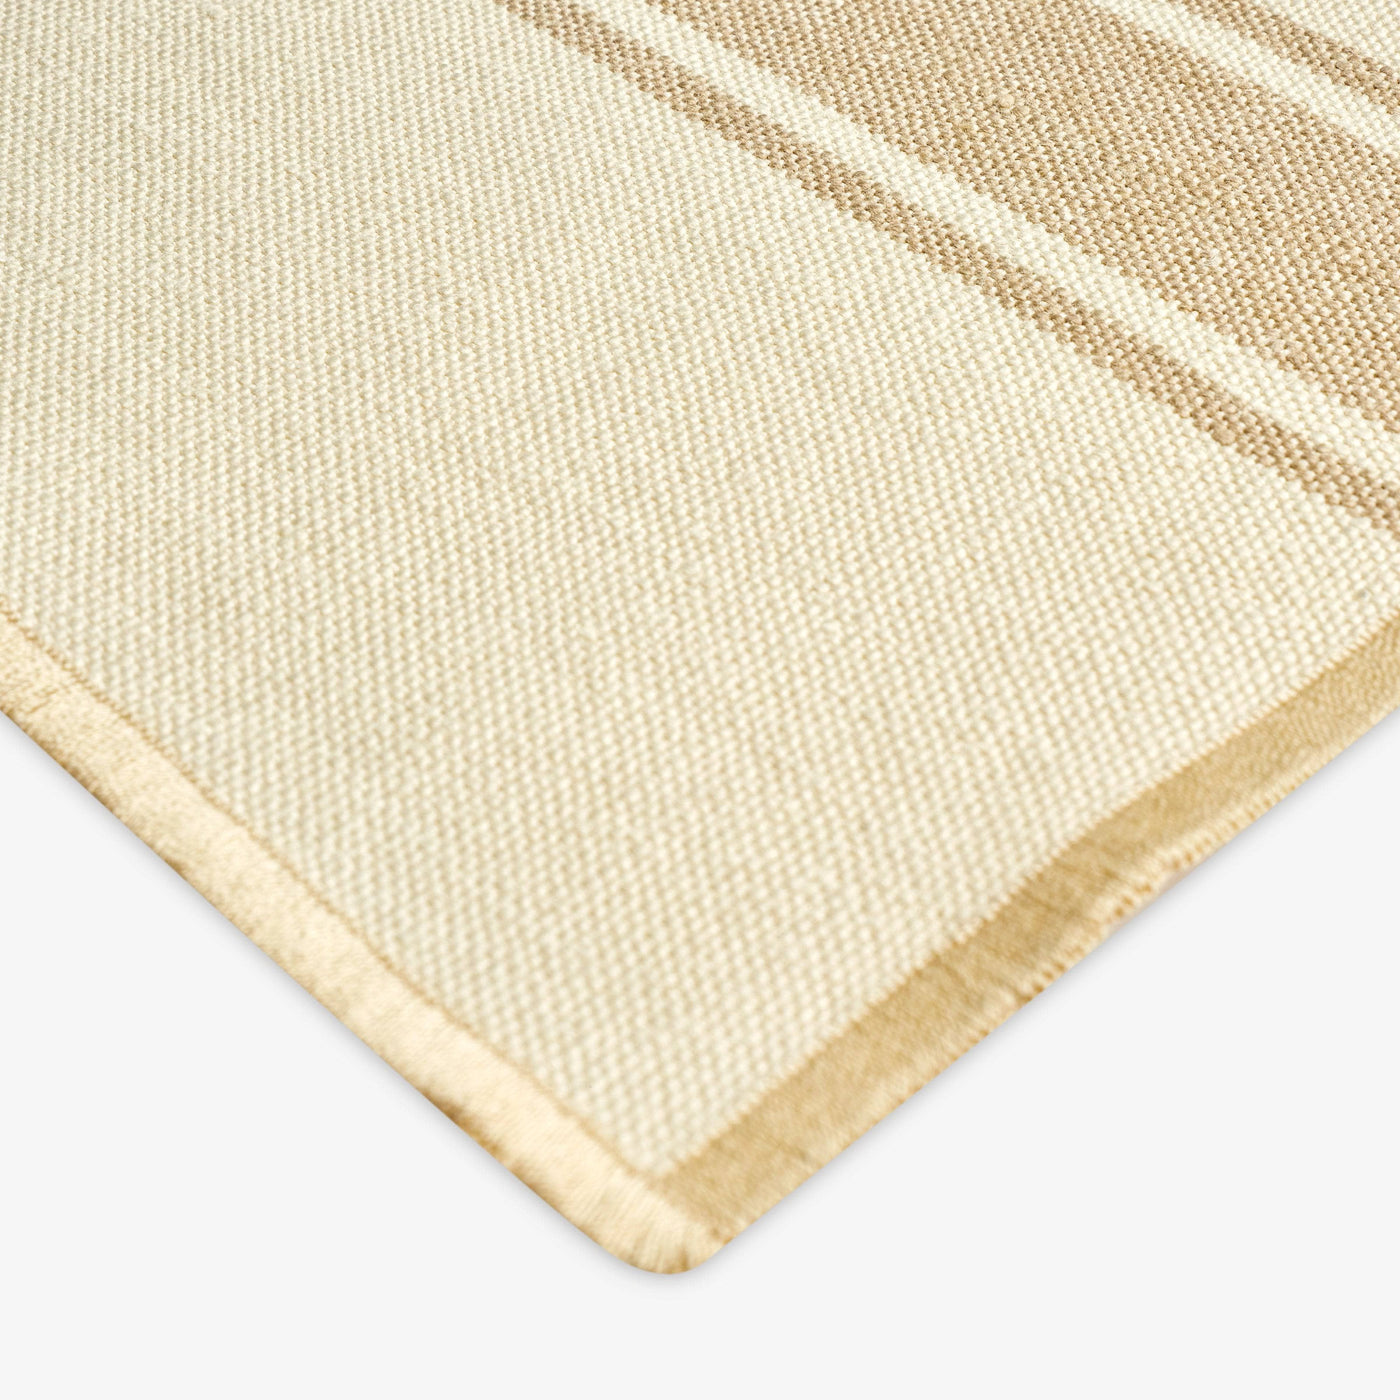 Mary Set of 2 Striped Placemats, Natural - Beige, 35x46 cm 5